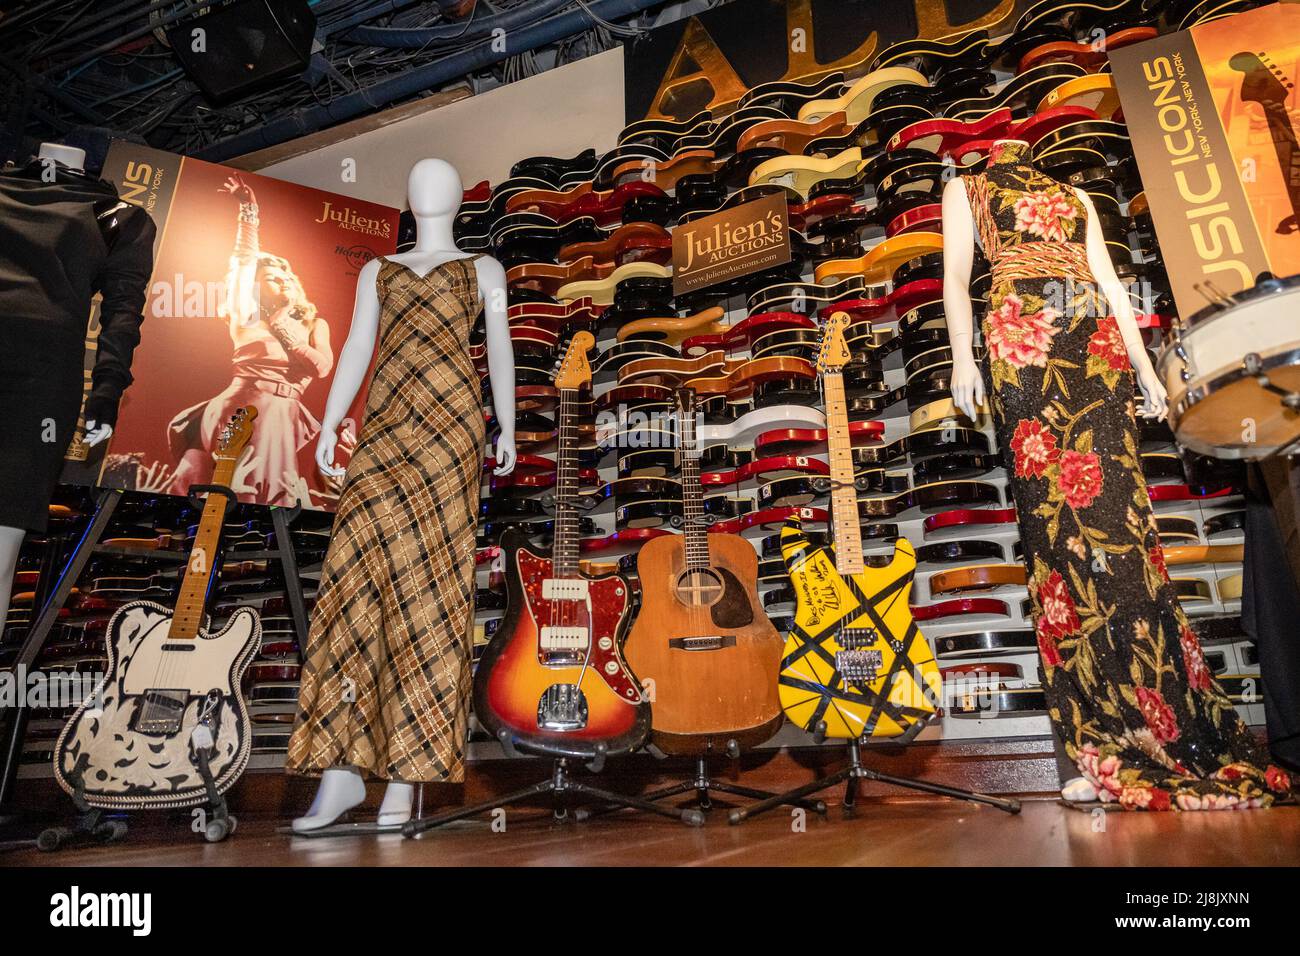 New York, USA. 15th May, 2022. Julien's Auctions presents an auction preview of Waylon Jennings 1990 Fender guitar, Cher's Mackie gown, and guitars owned by Jimi Hendrix, Johnny Cash, Eddie van Halen, and Whitney Houston's Bouwer gown at the Hard Rock Cafe in New York, New York, on May 16, 2022. The auction will take place from May 20-22 at the Hard Rock Cafe. (Photo by Gabriele Holtermann/Sipa USA) Credit: Sipa USA/Alamy Live News Stock Photo